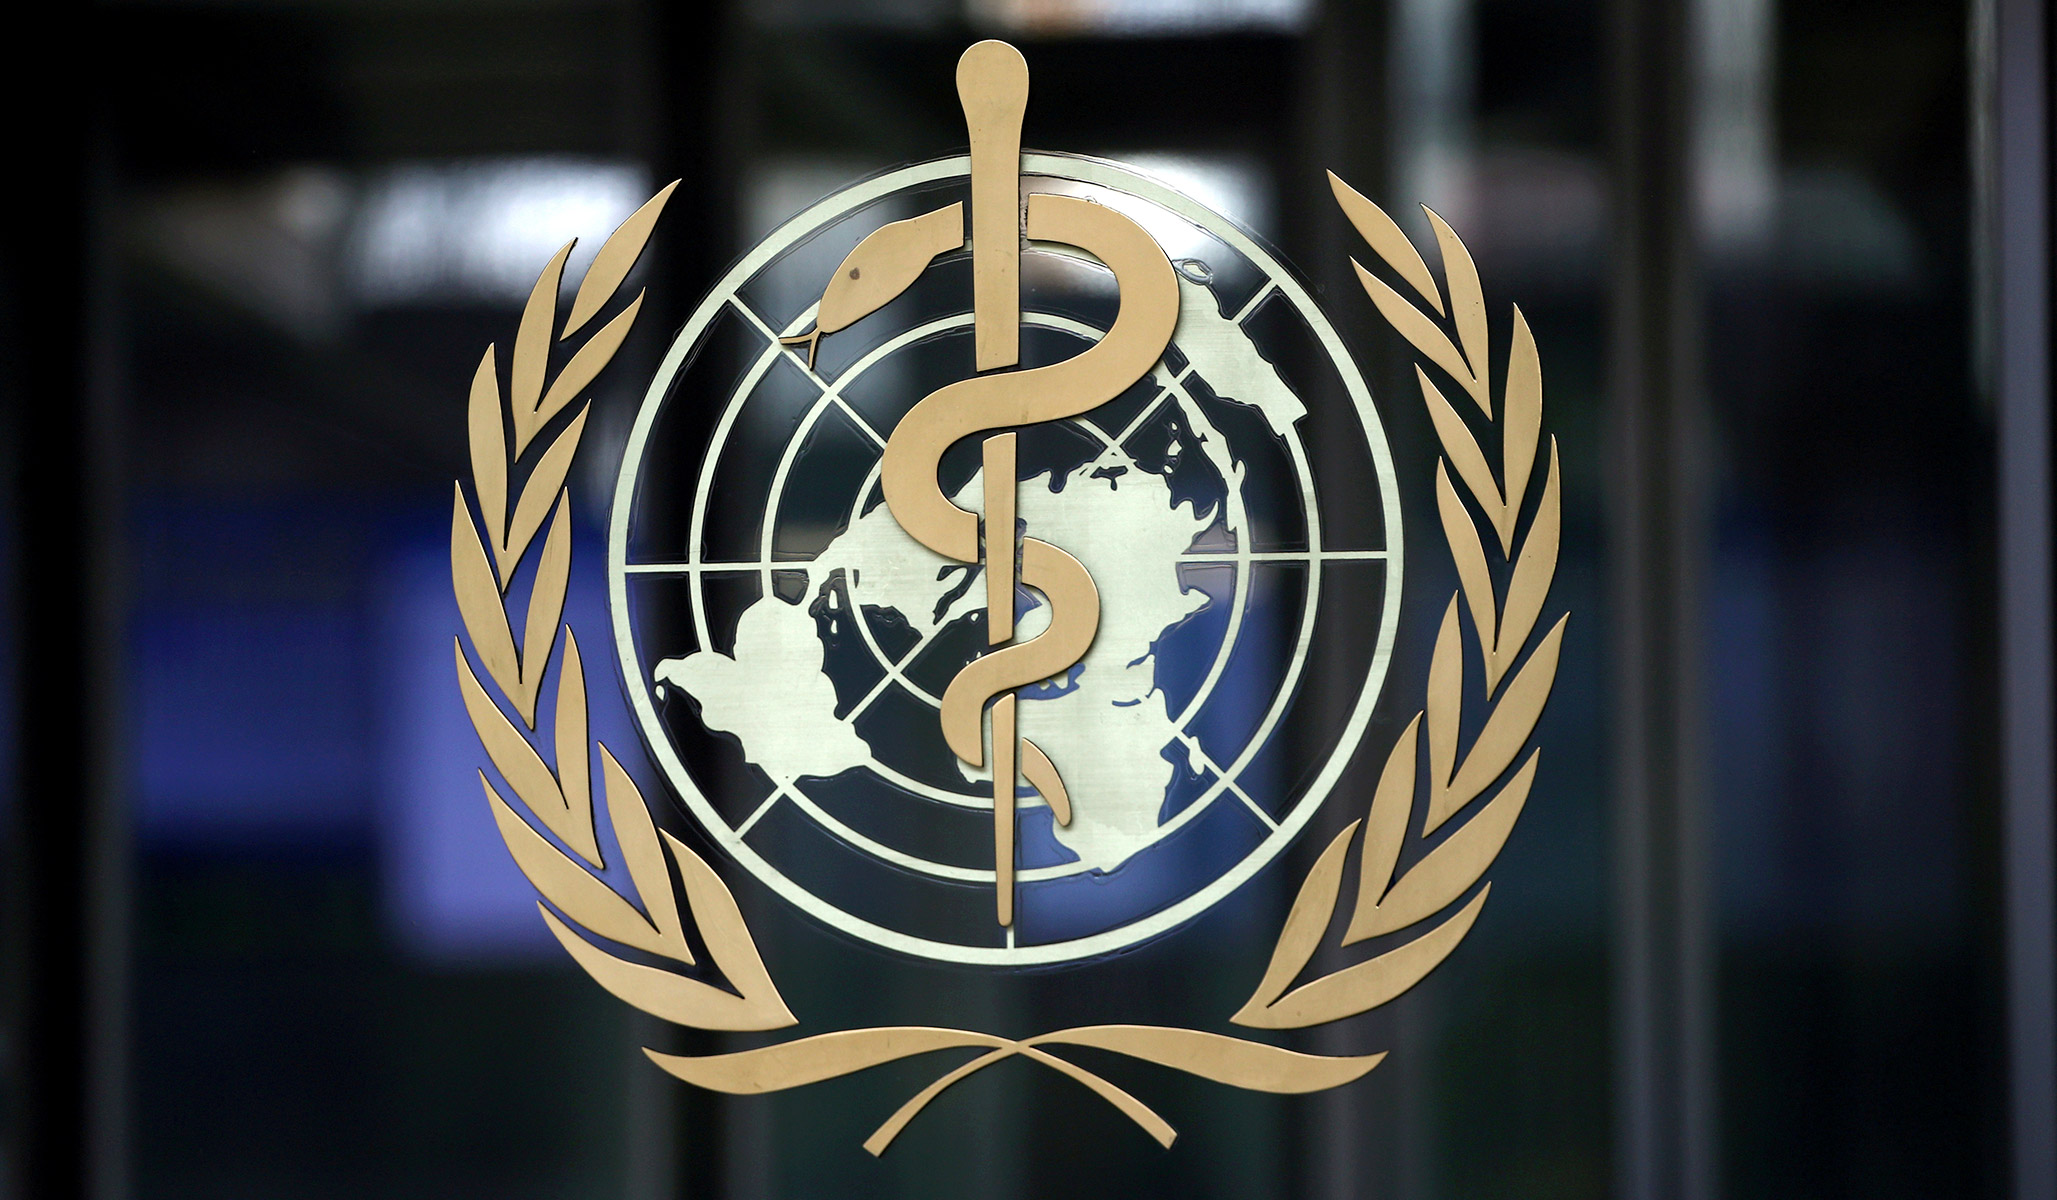 Executive Assistant Vacancy at WHO